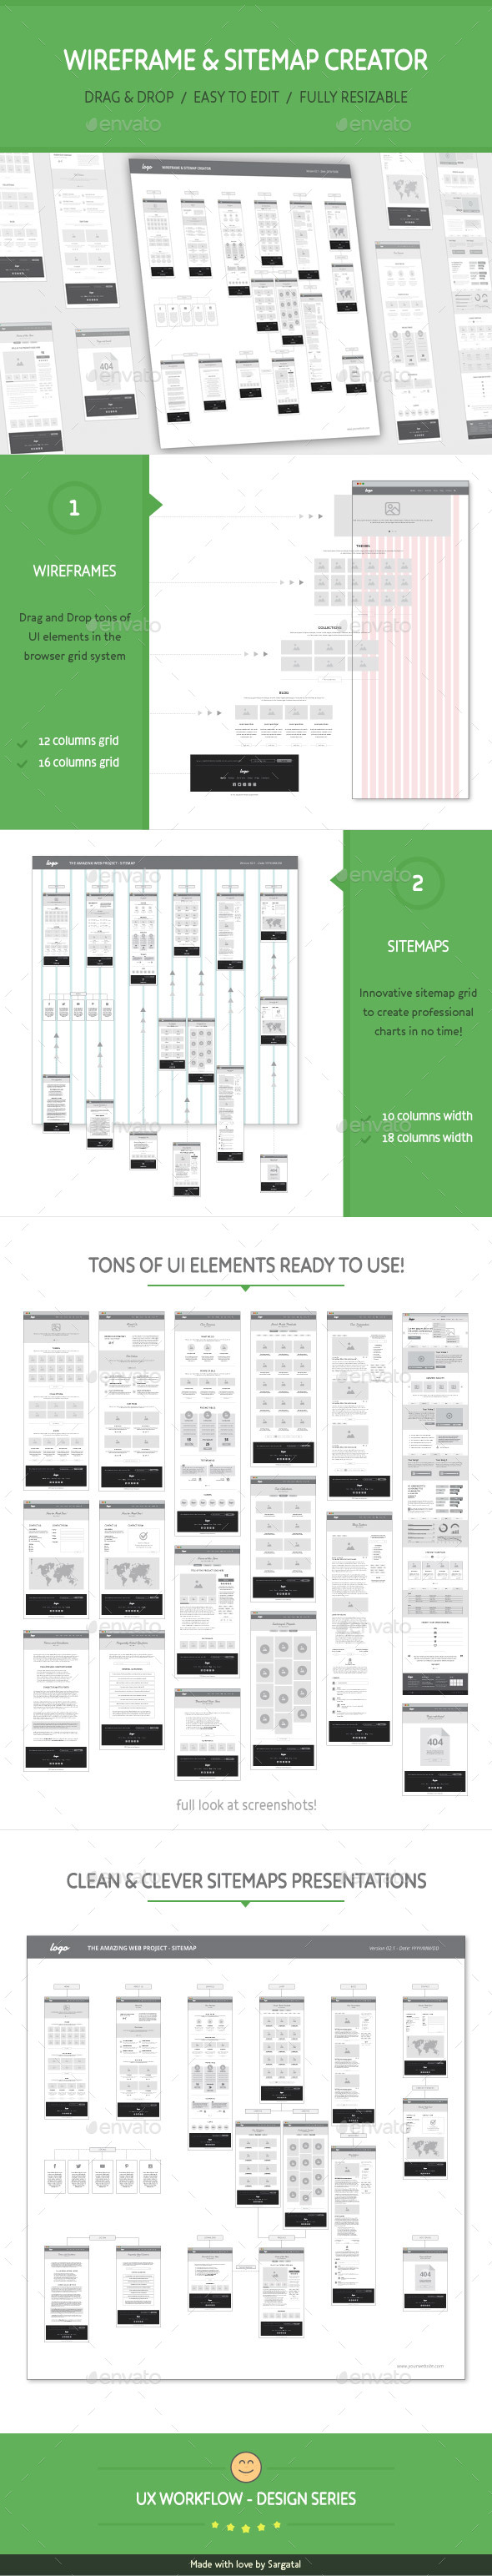 UX Workflow - Wireframe and Sitemap Creator